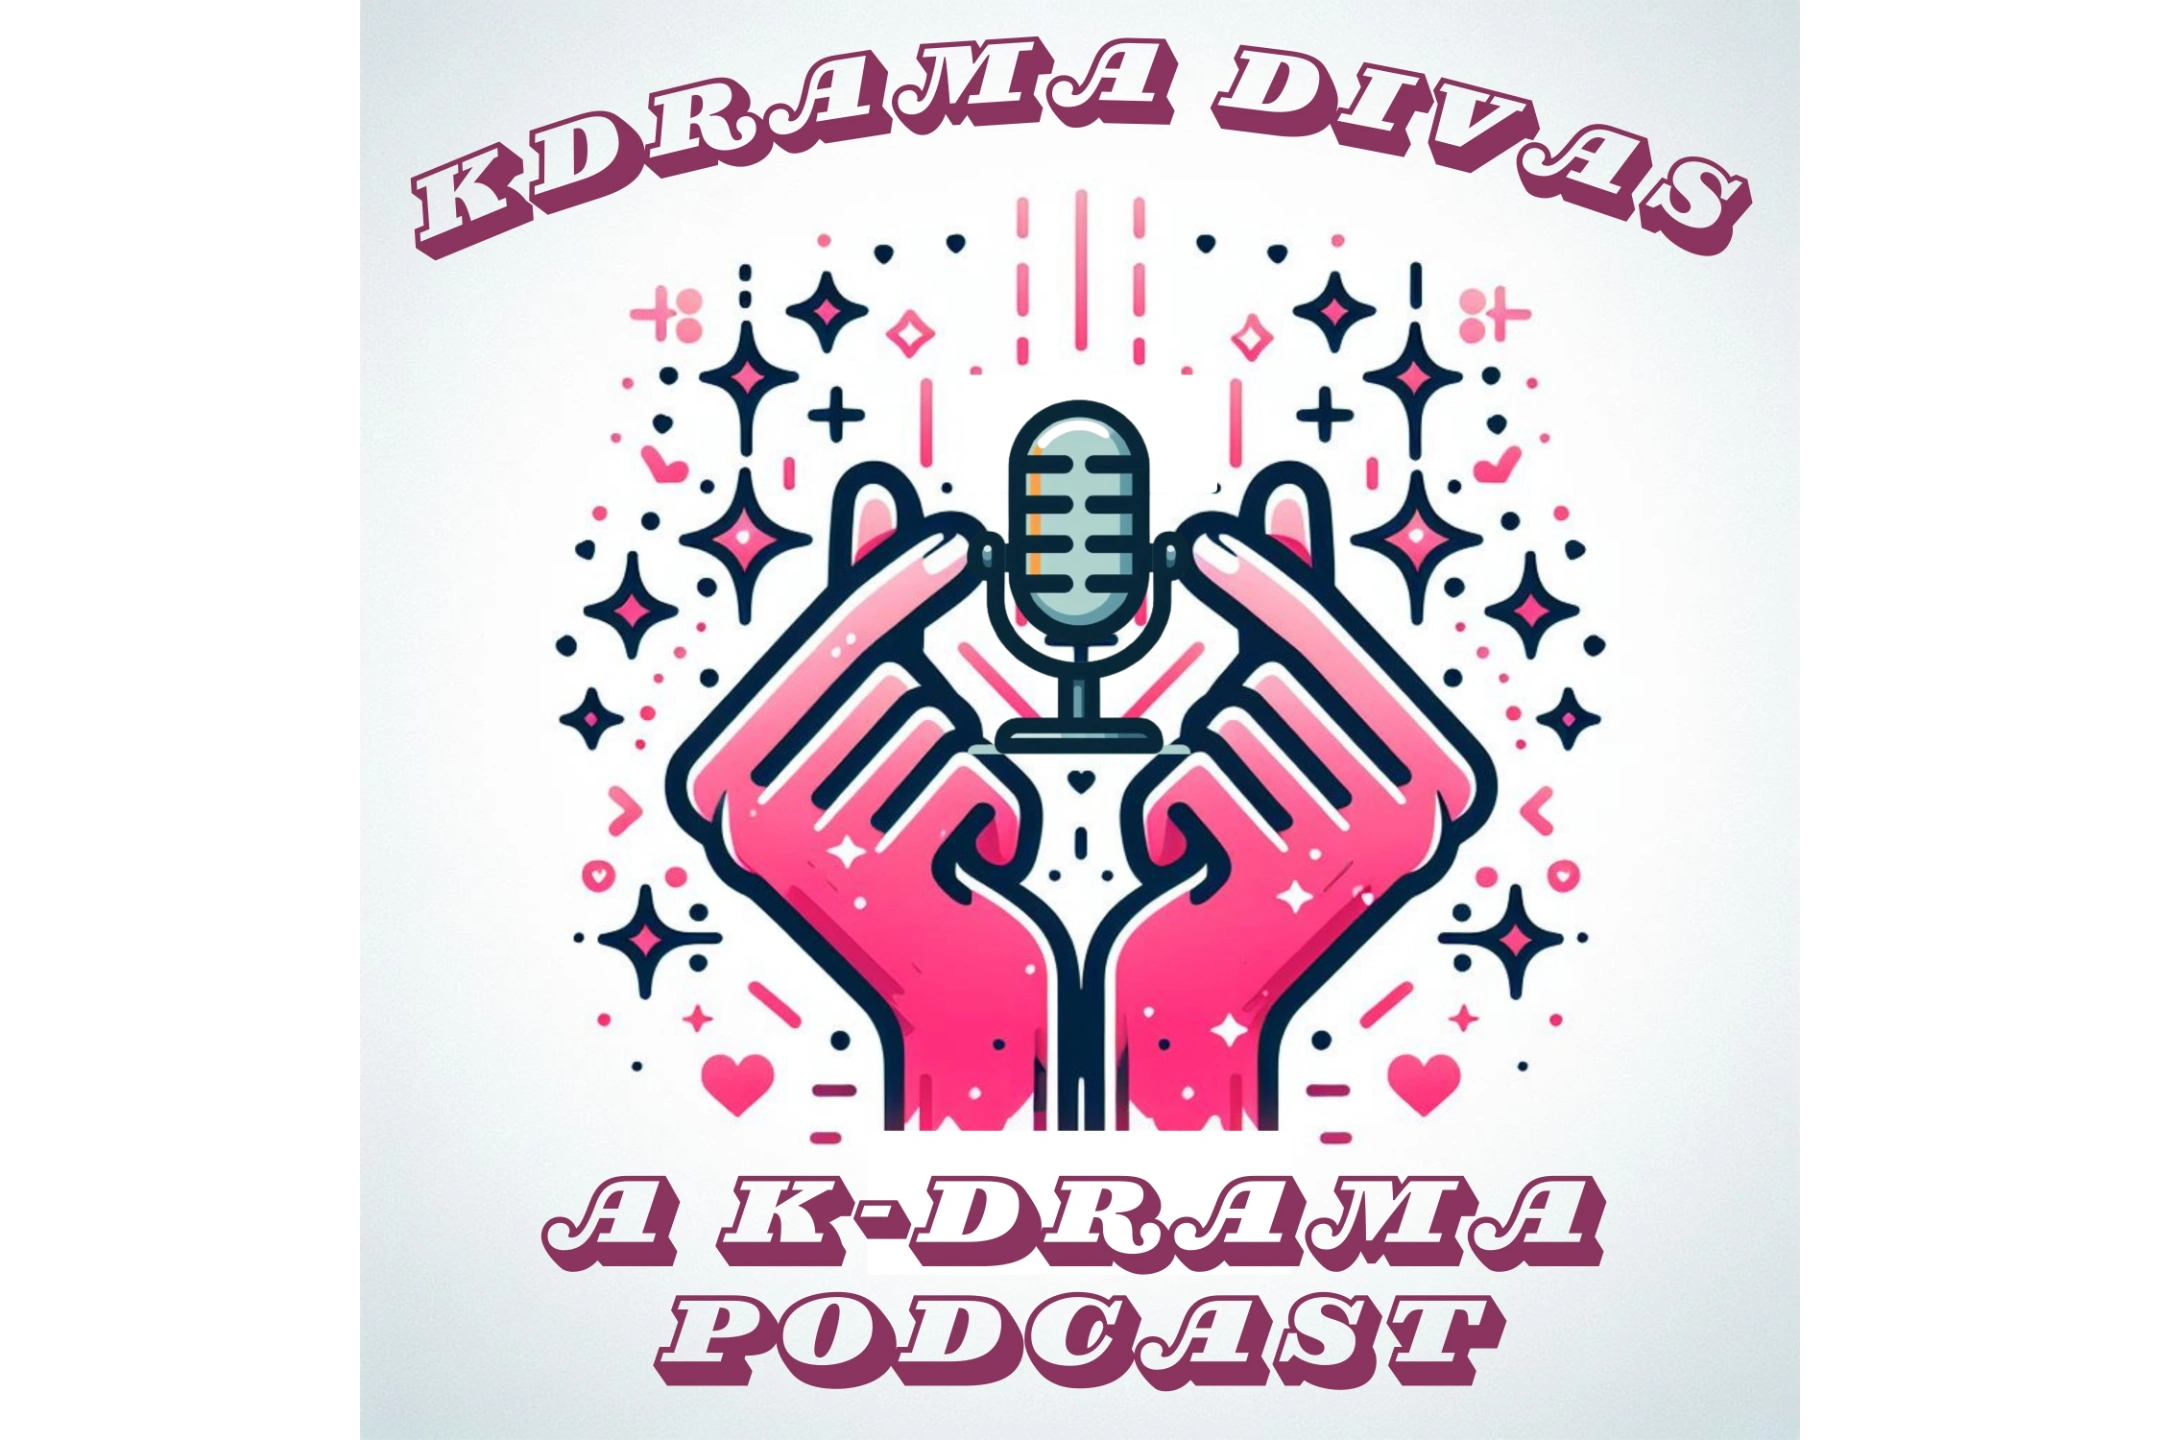 Welcome to KDrama Divas, the ultimate podcast for passionate fans of Korean dramas! 